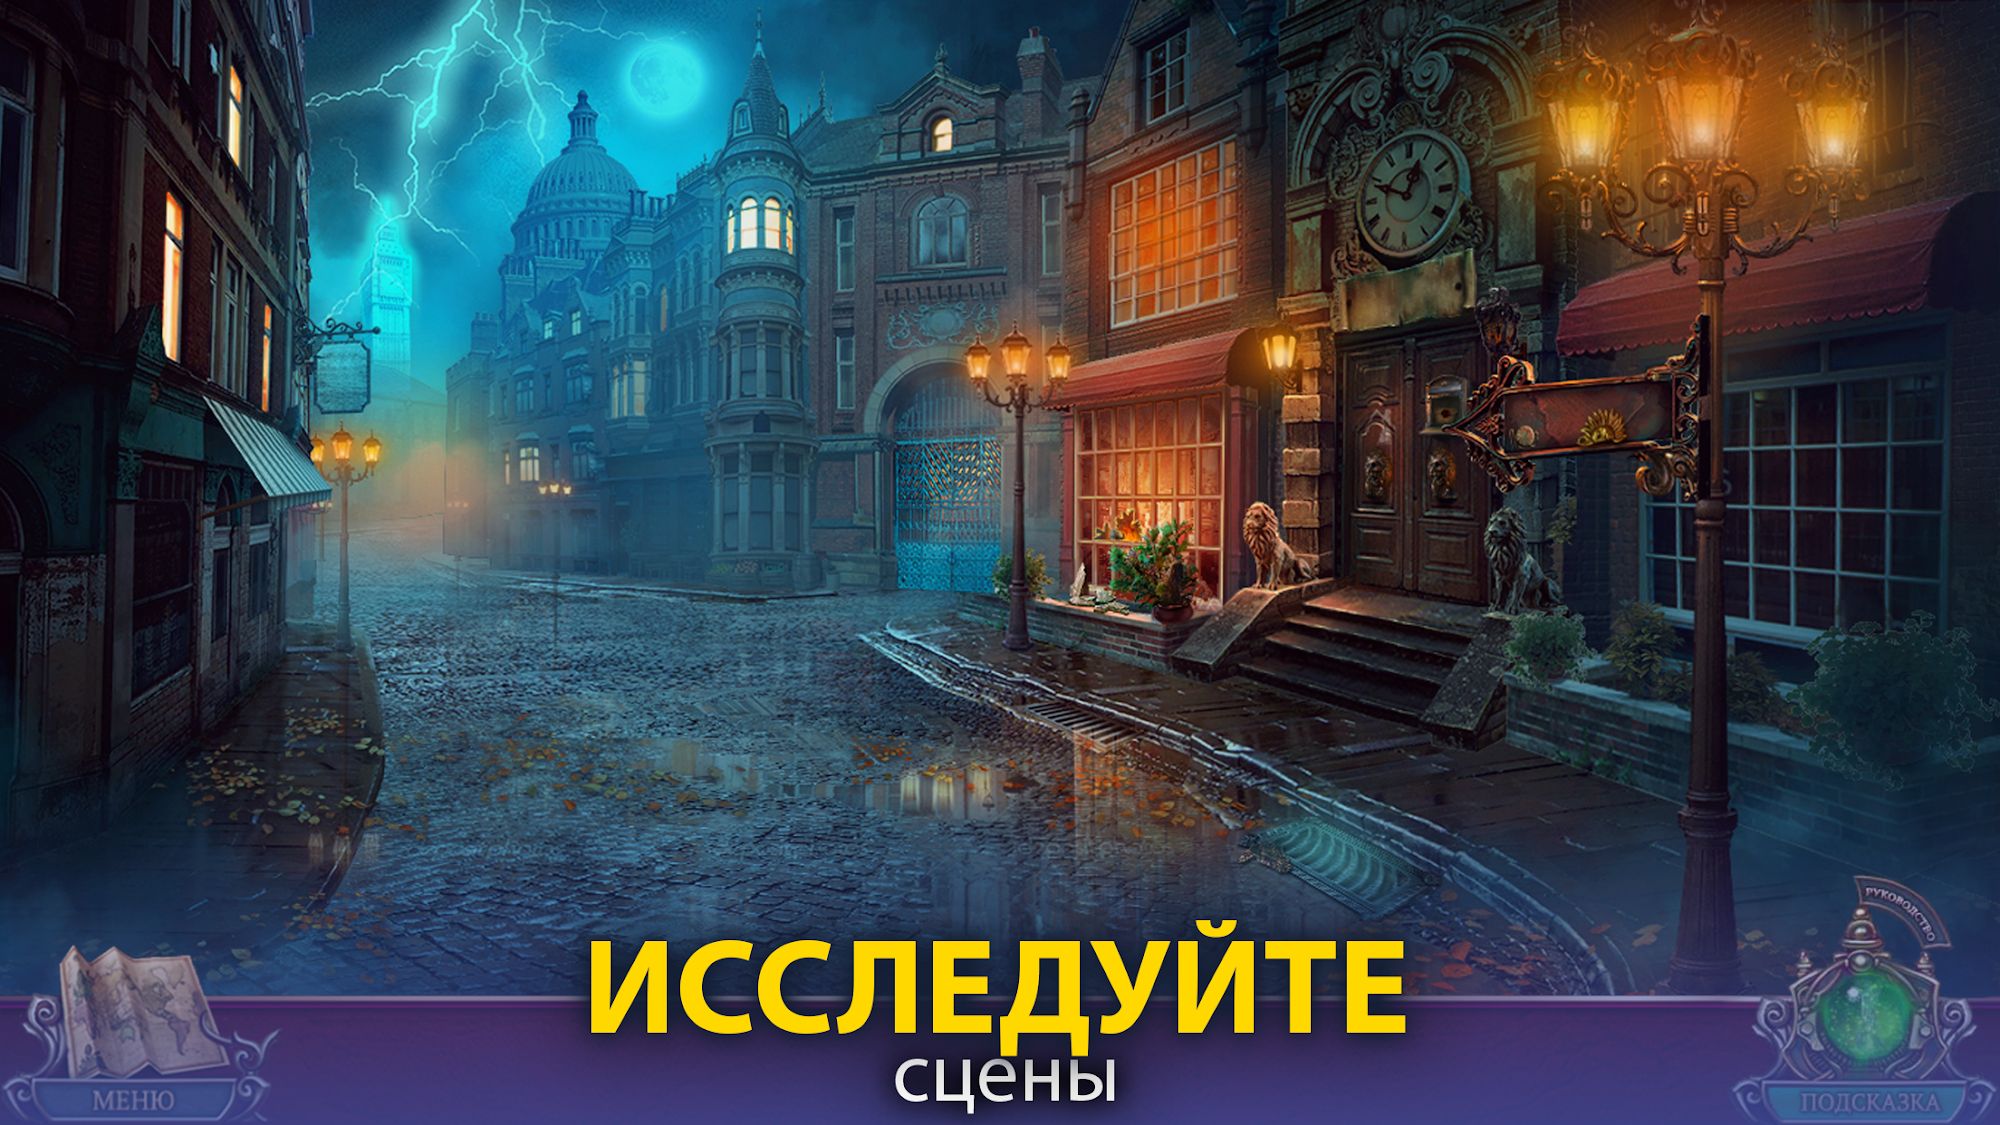 Full version of Android apk app Hidden Objects - Dark City: London for tablet and phone.